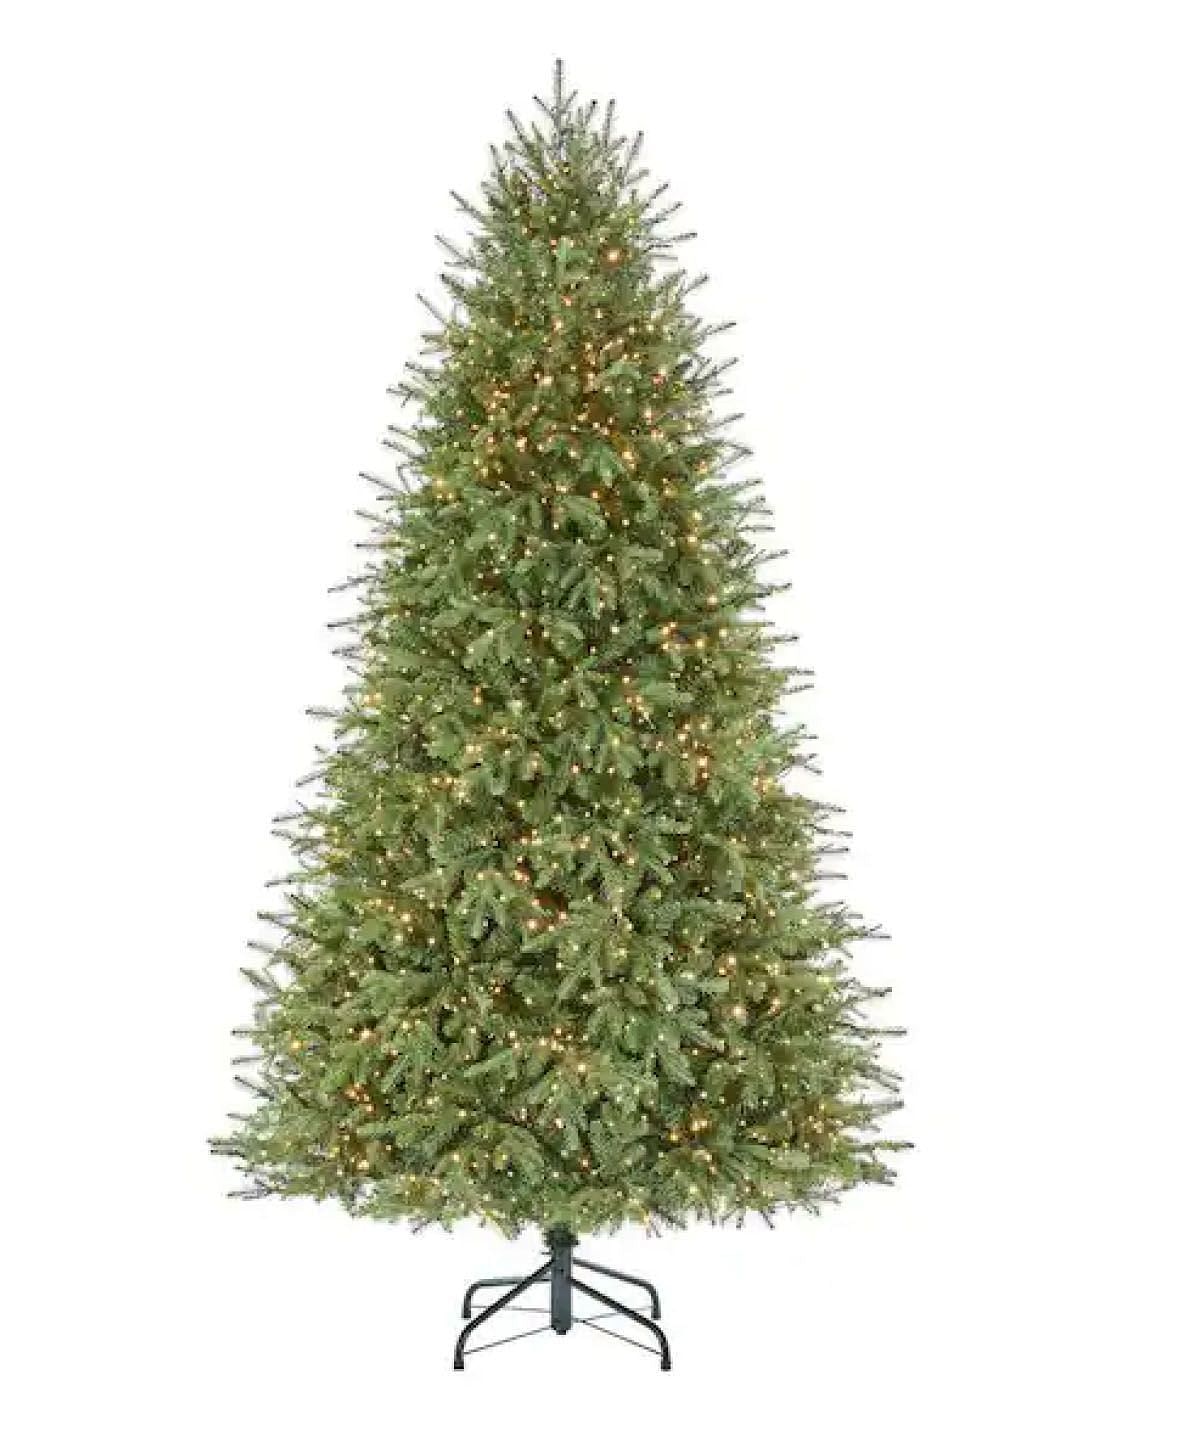 T27 or 7.5 Grand Duchess Balsam First Christmas Tree (image via The Home Depot)